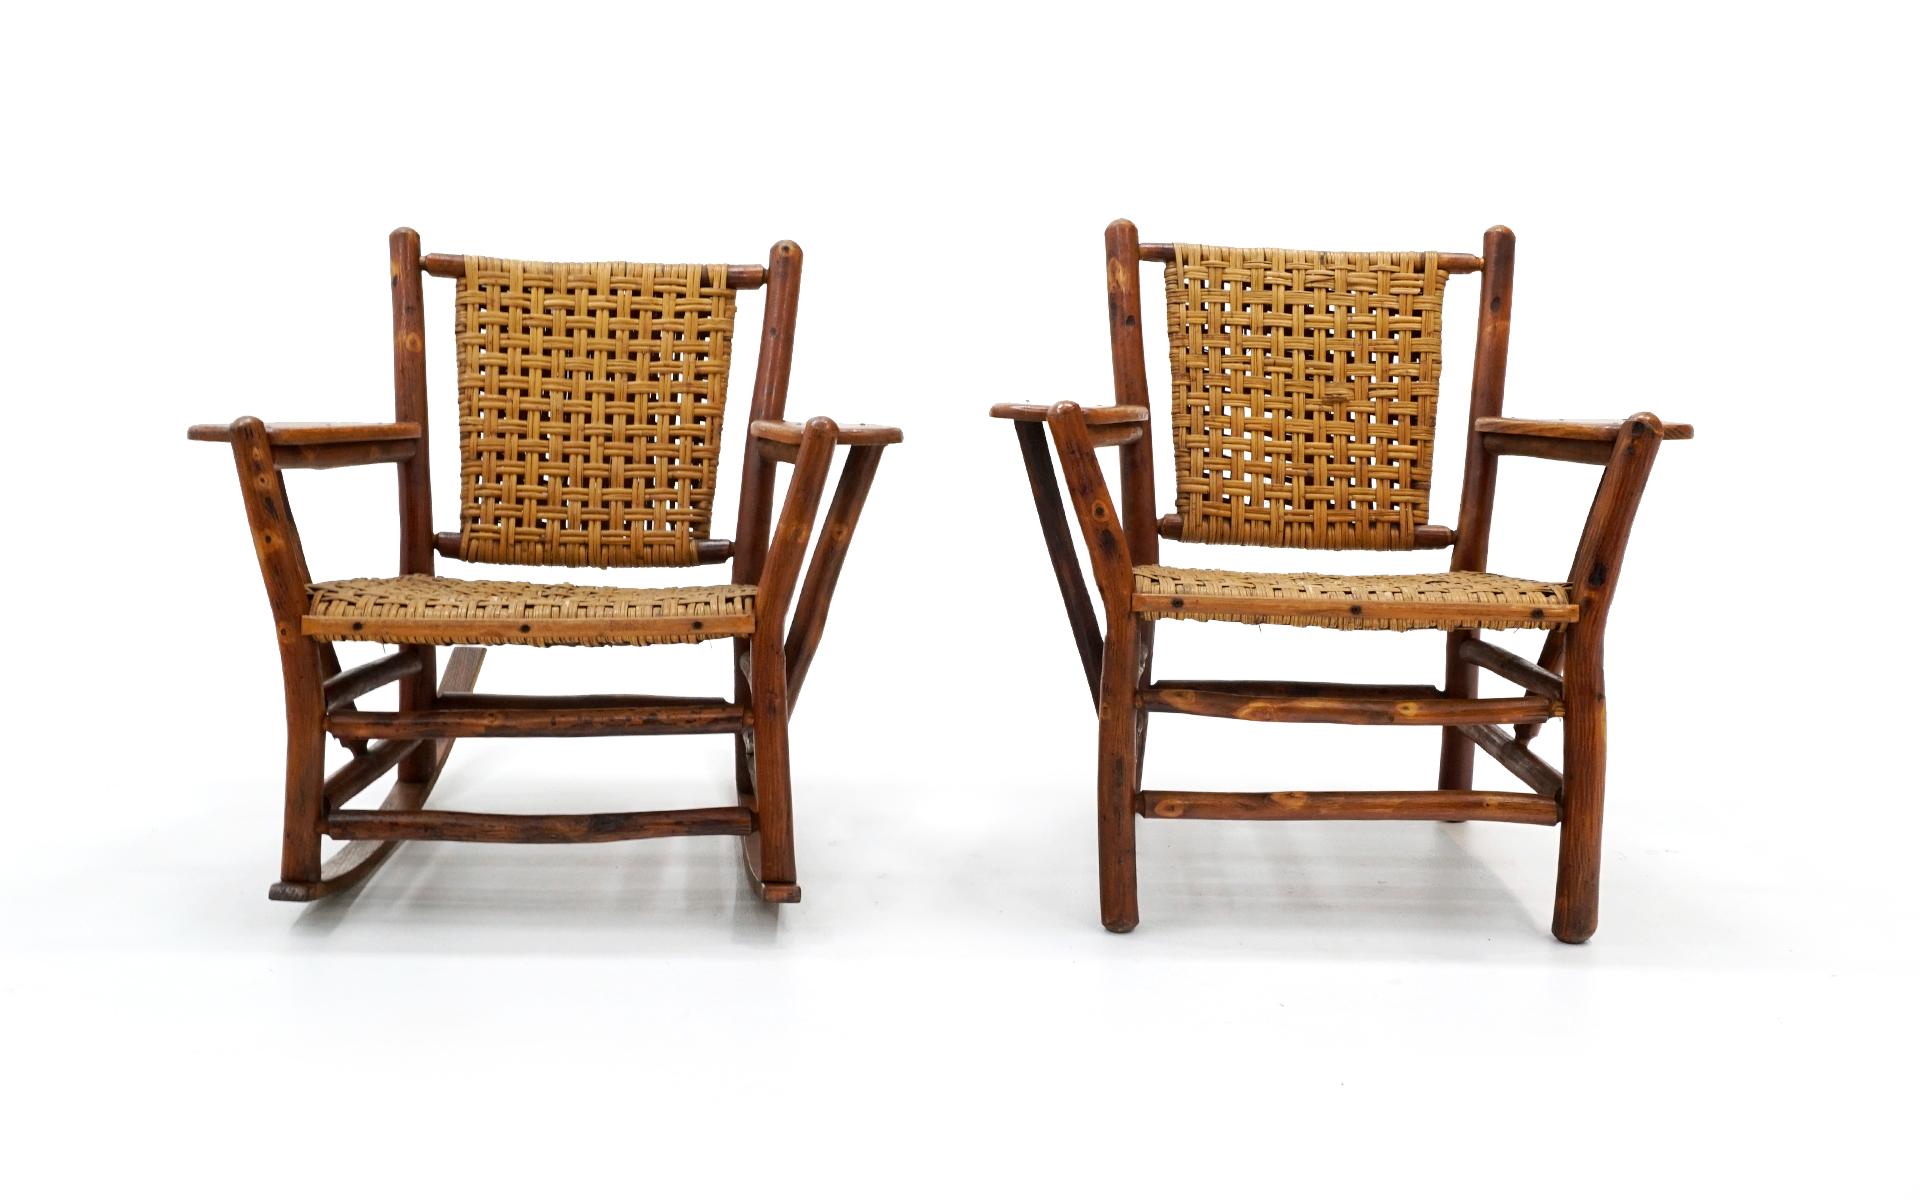 Complimenting pair of old hickory armchairs. One is a lounge chair and the other a rocking chair. The solid hickory frames and woven wicker seats and backs are in very good condition both cosmetically and structurally. No holes or tears in the